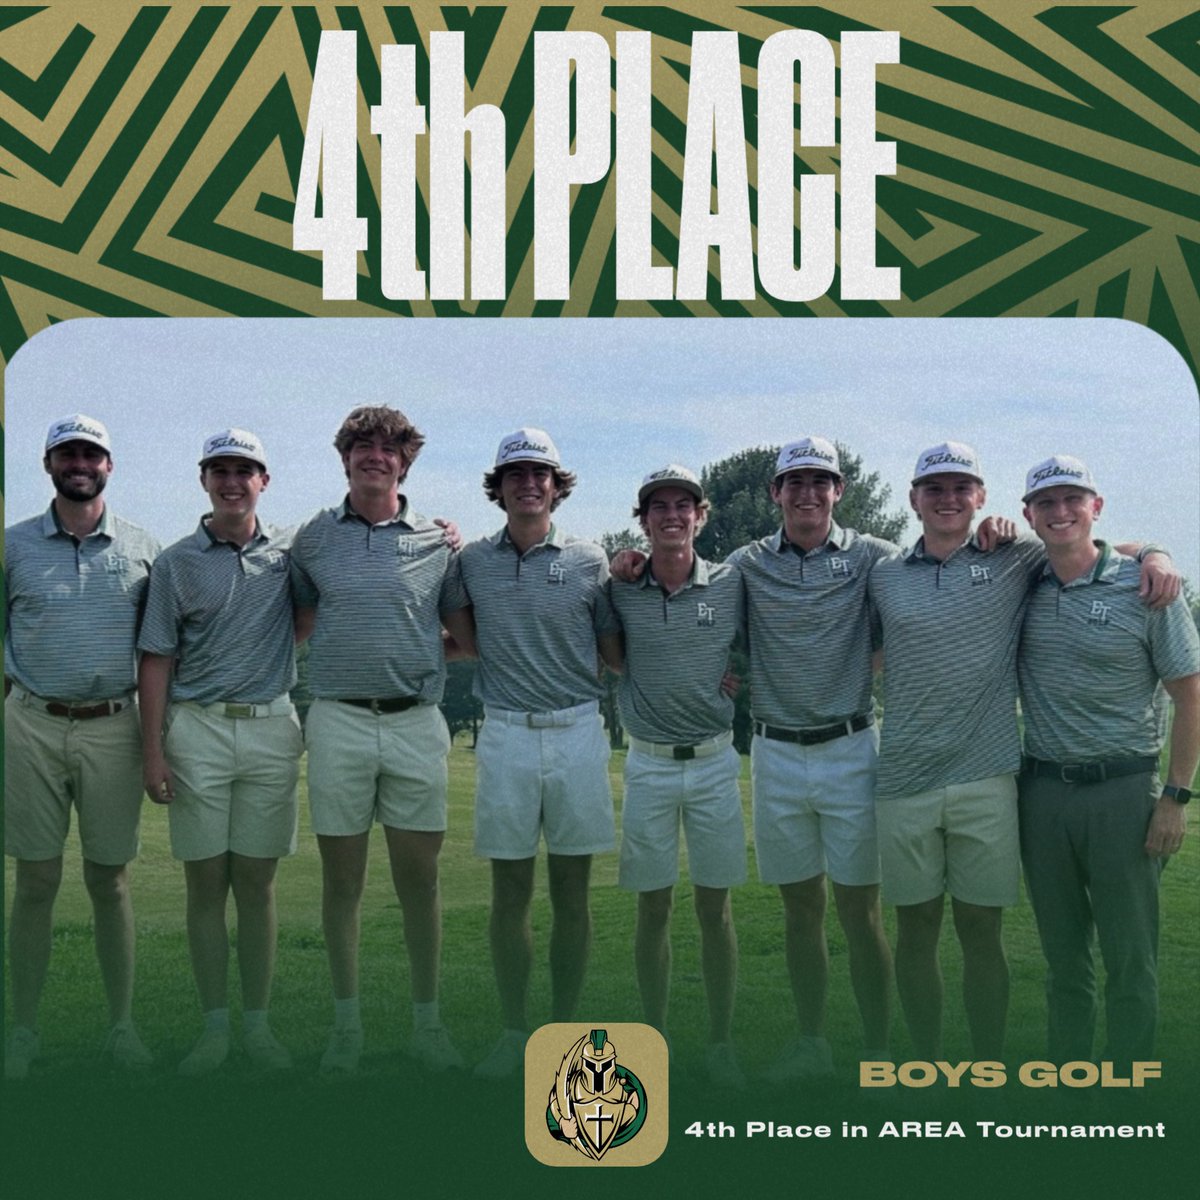 Congratulations to the boys golf team on advancing to Sectionals! #GoTitans